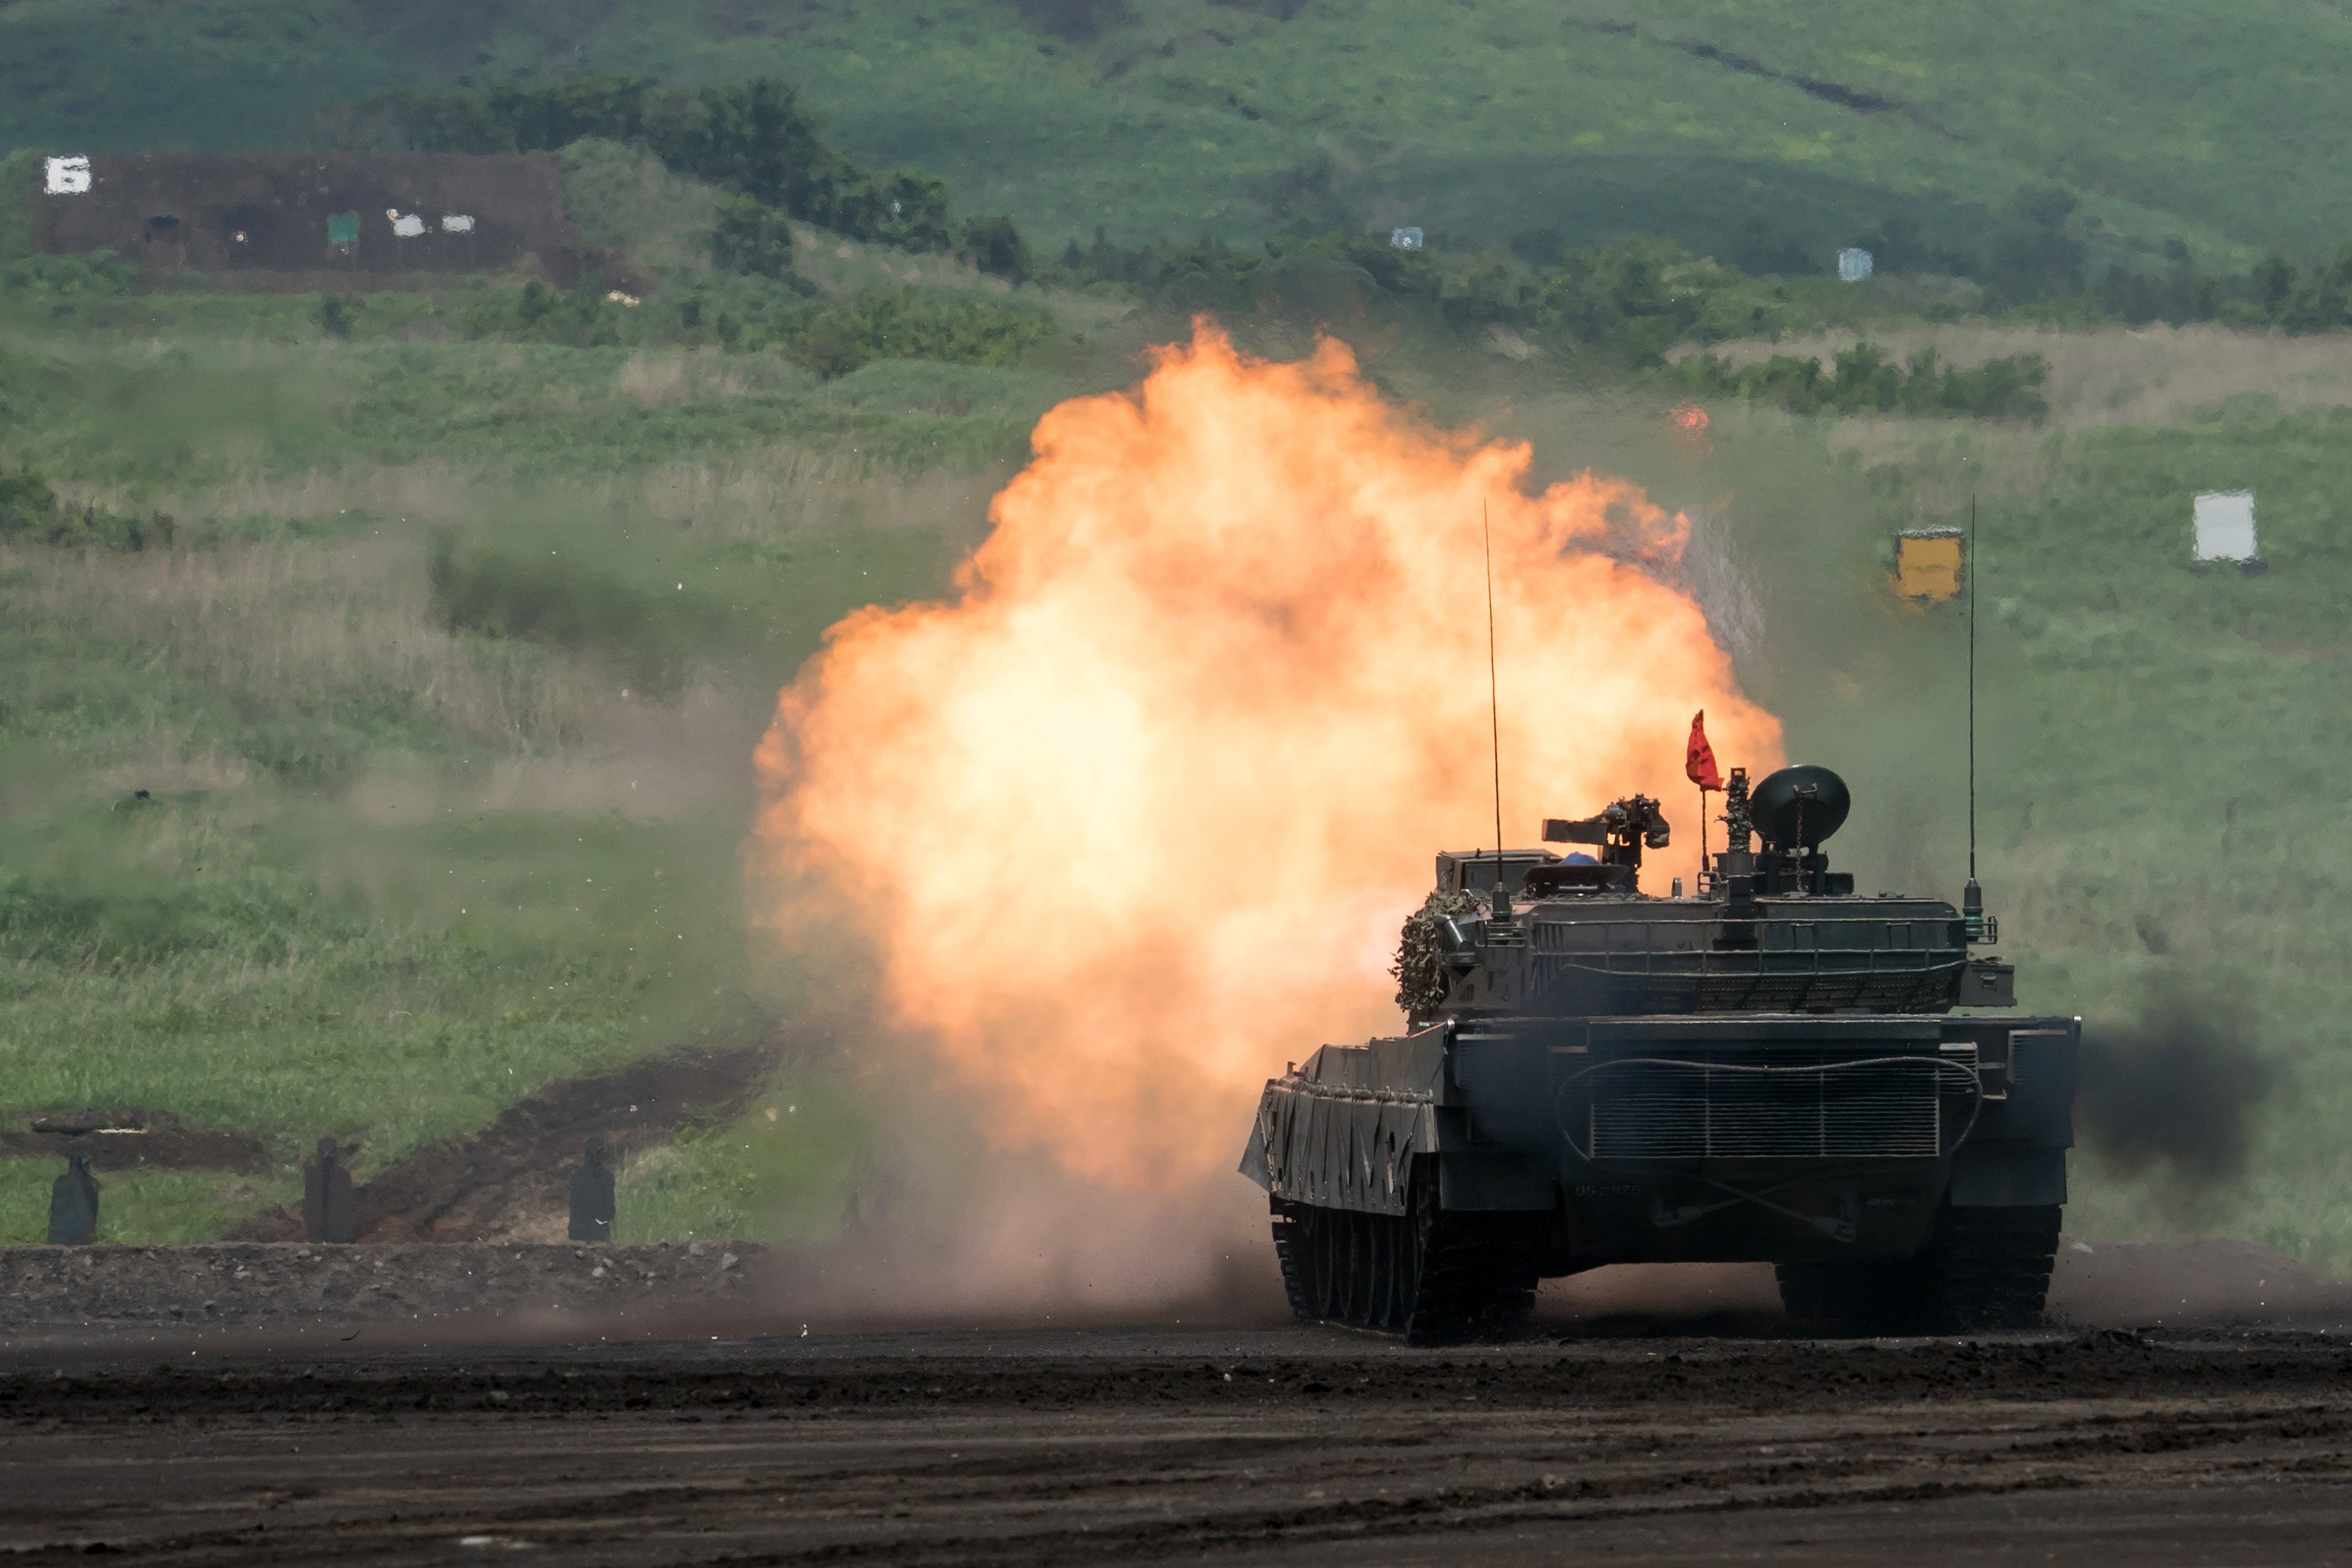 A Japanese military tank fires ammunition during a live-fire exercise in Gotemba, Shizuoka. Photo: Getty Images